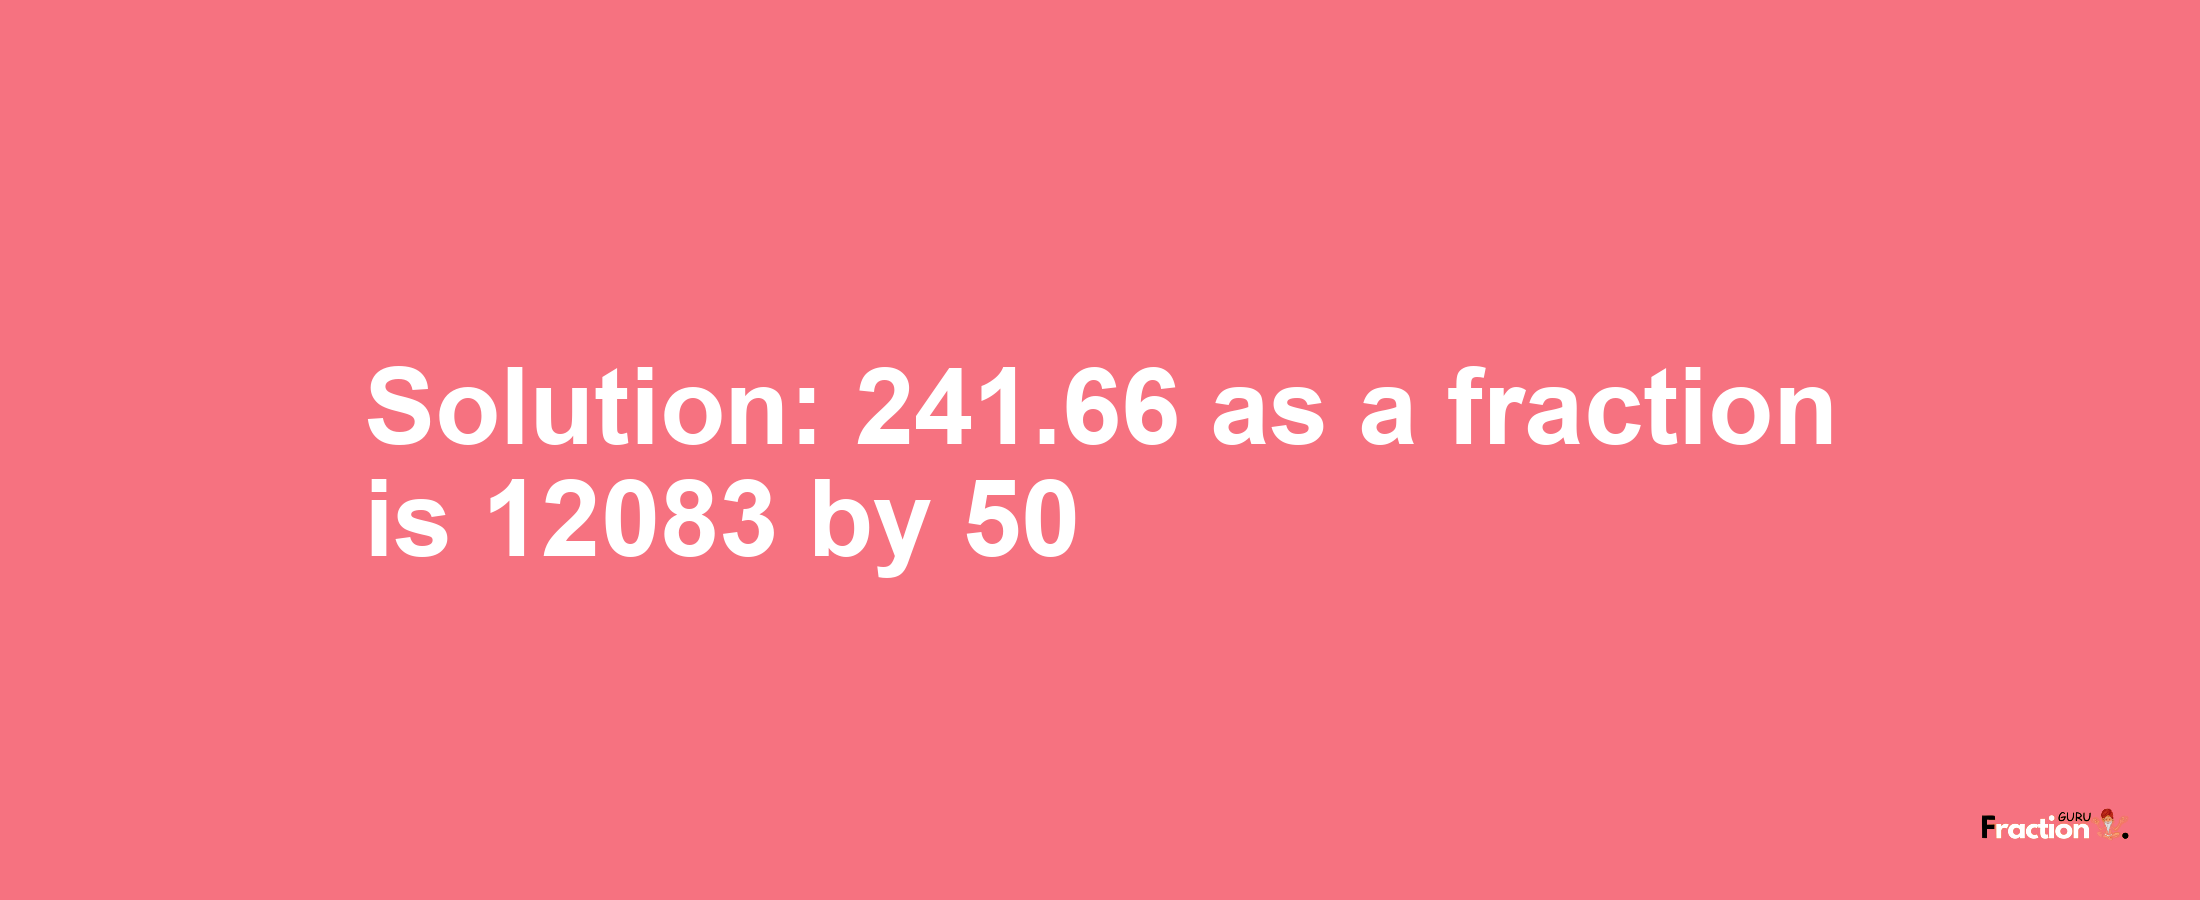 Solution:241.66 as a fraction is 12083/50